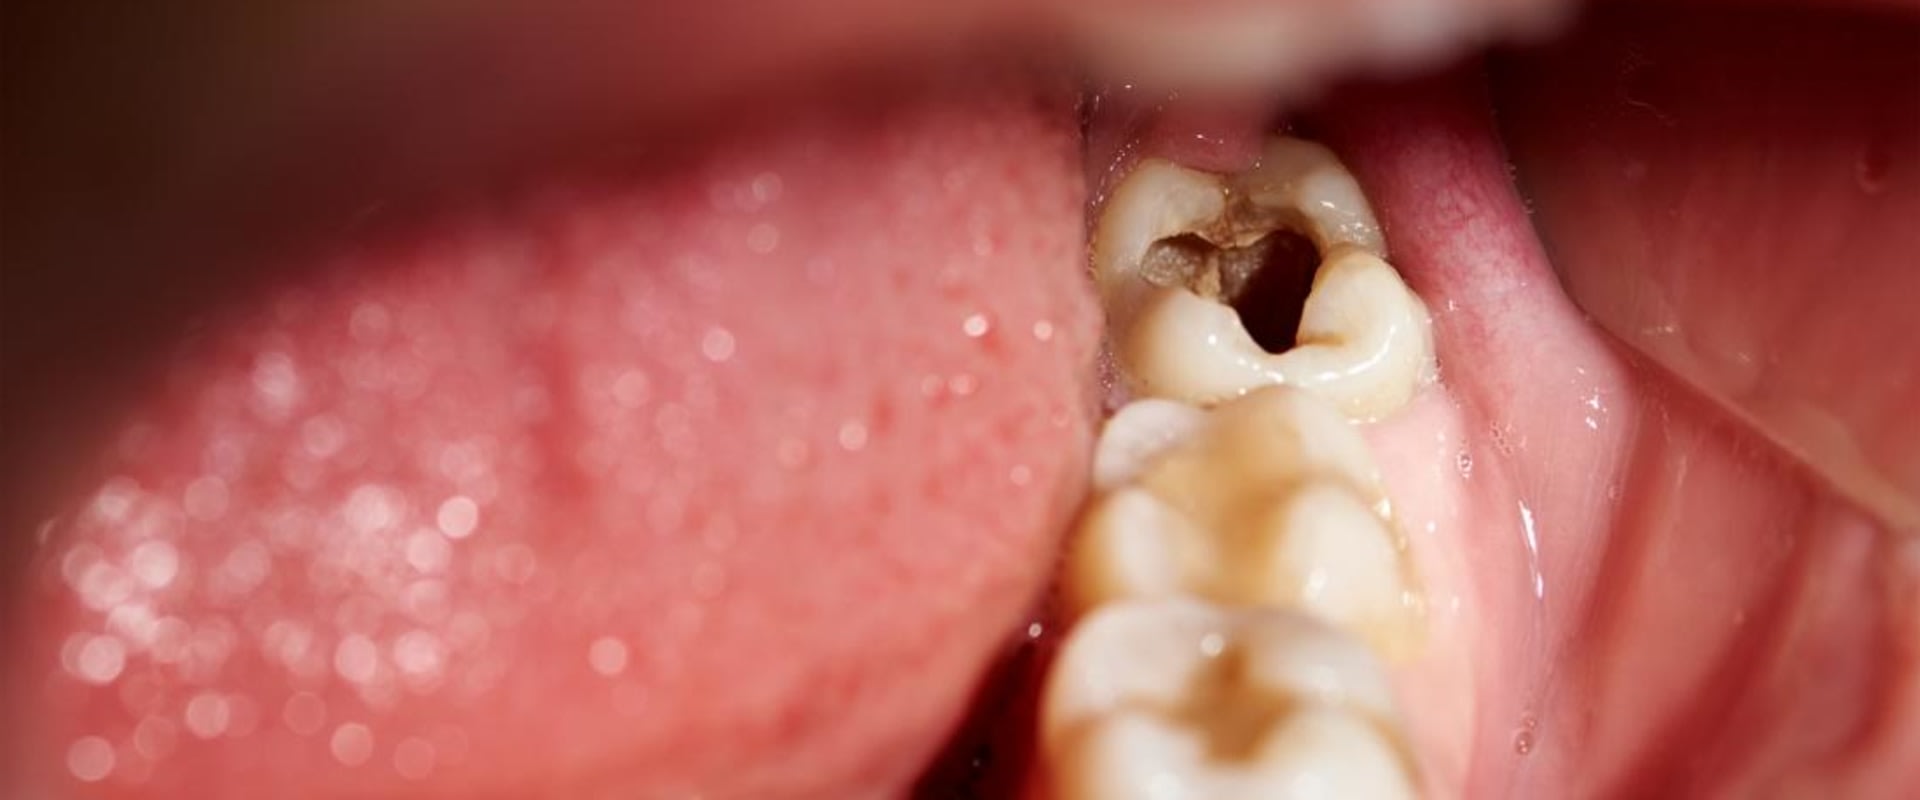 What Happens When You Have a Chipped Tooth?